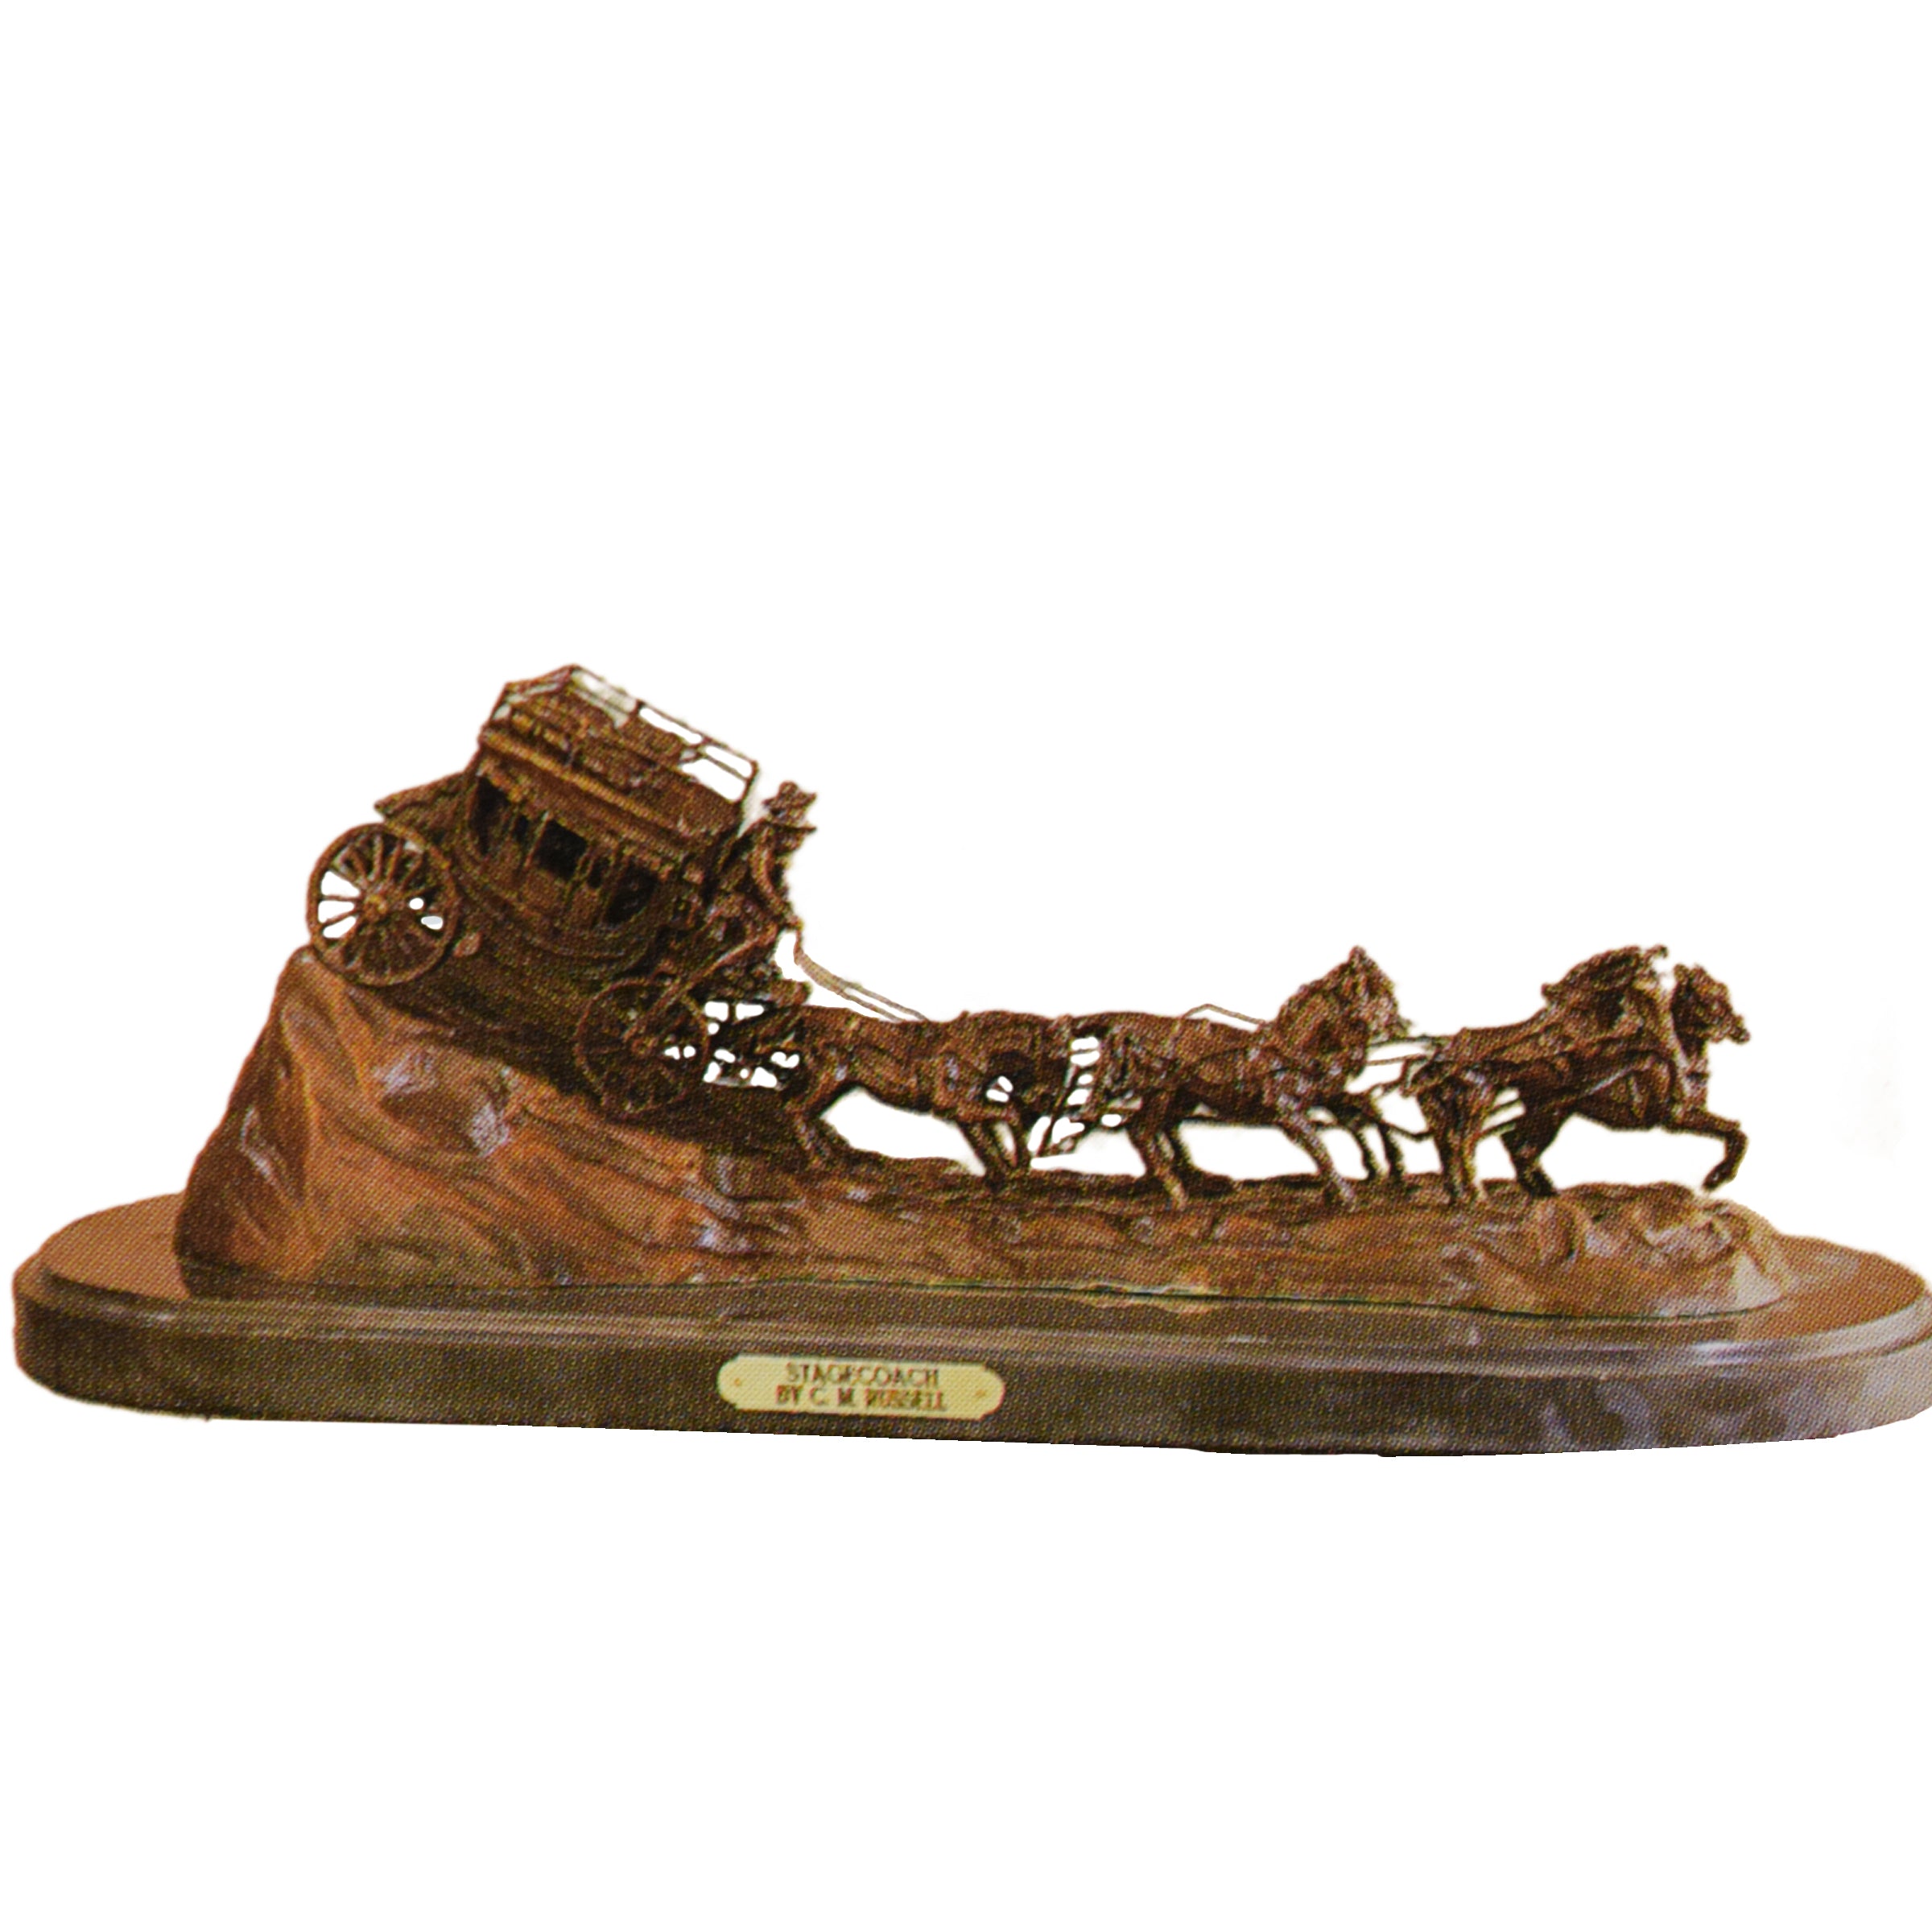 Stagecoach by Charles Russell, Fine Art, Bronze, Decorative